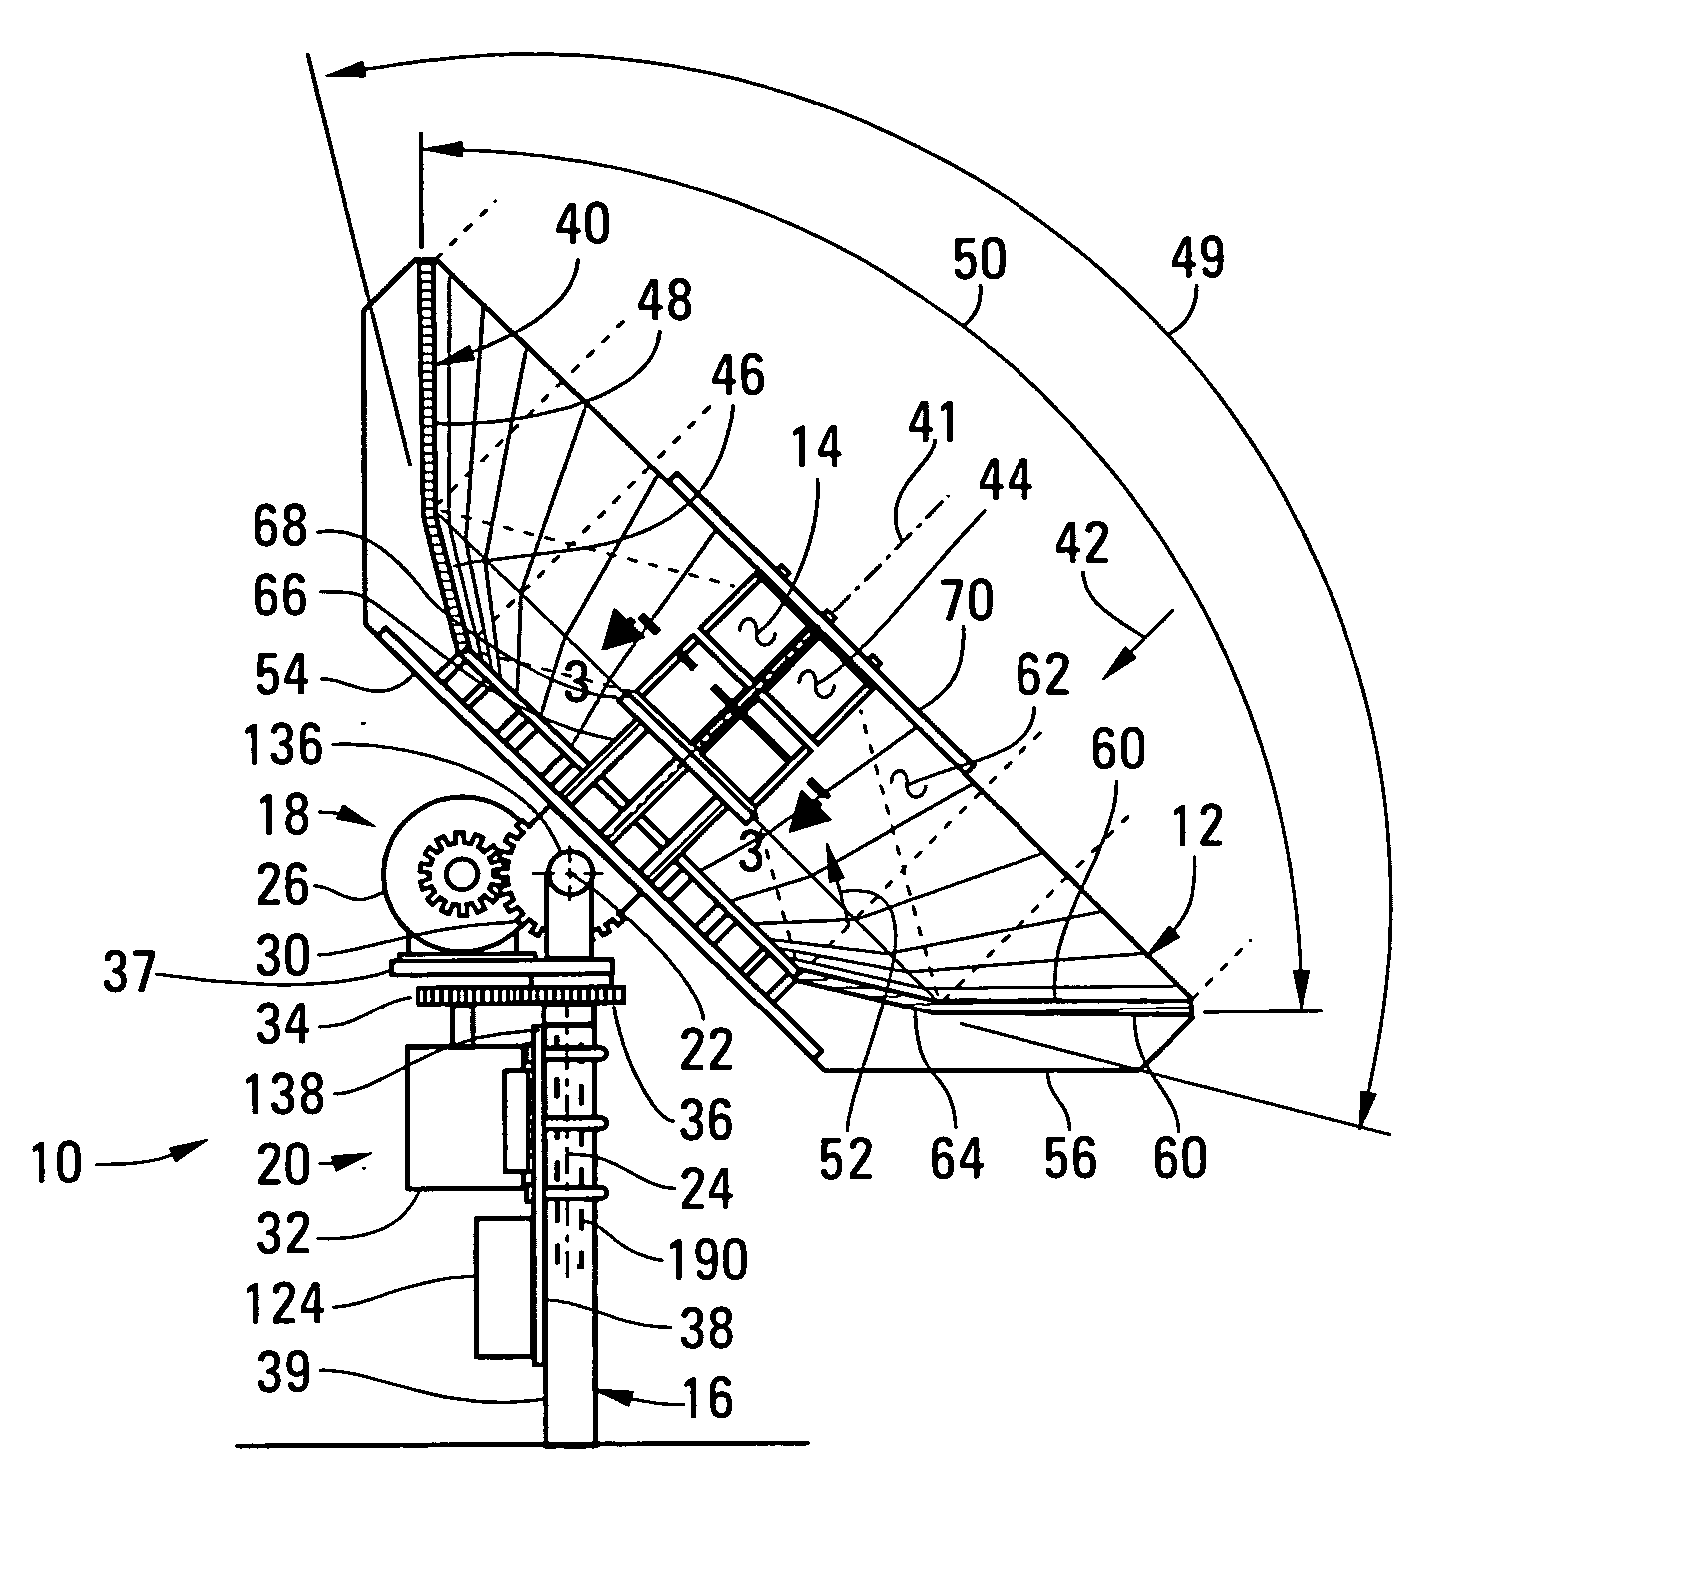 Apparatus for generating electrical power from solar radiation concentrated by a concave reflector